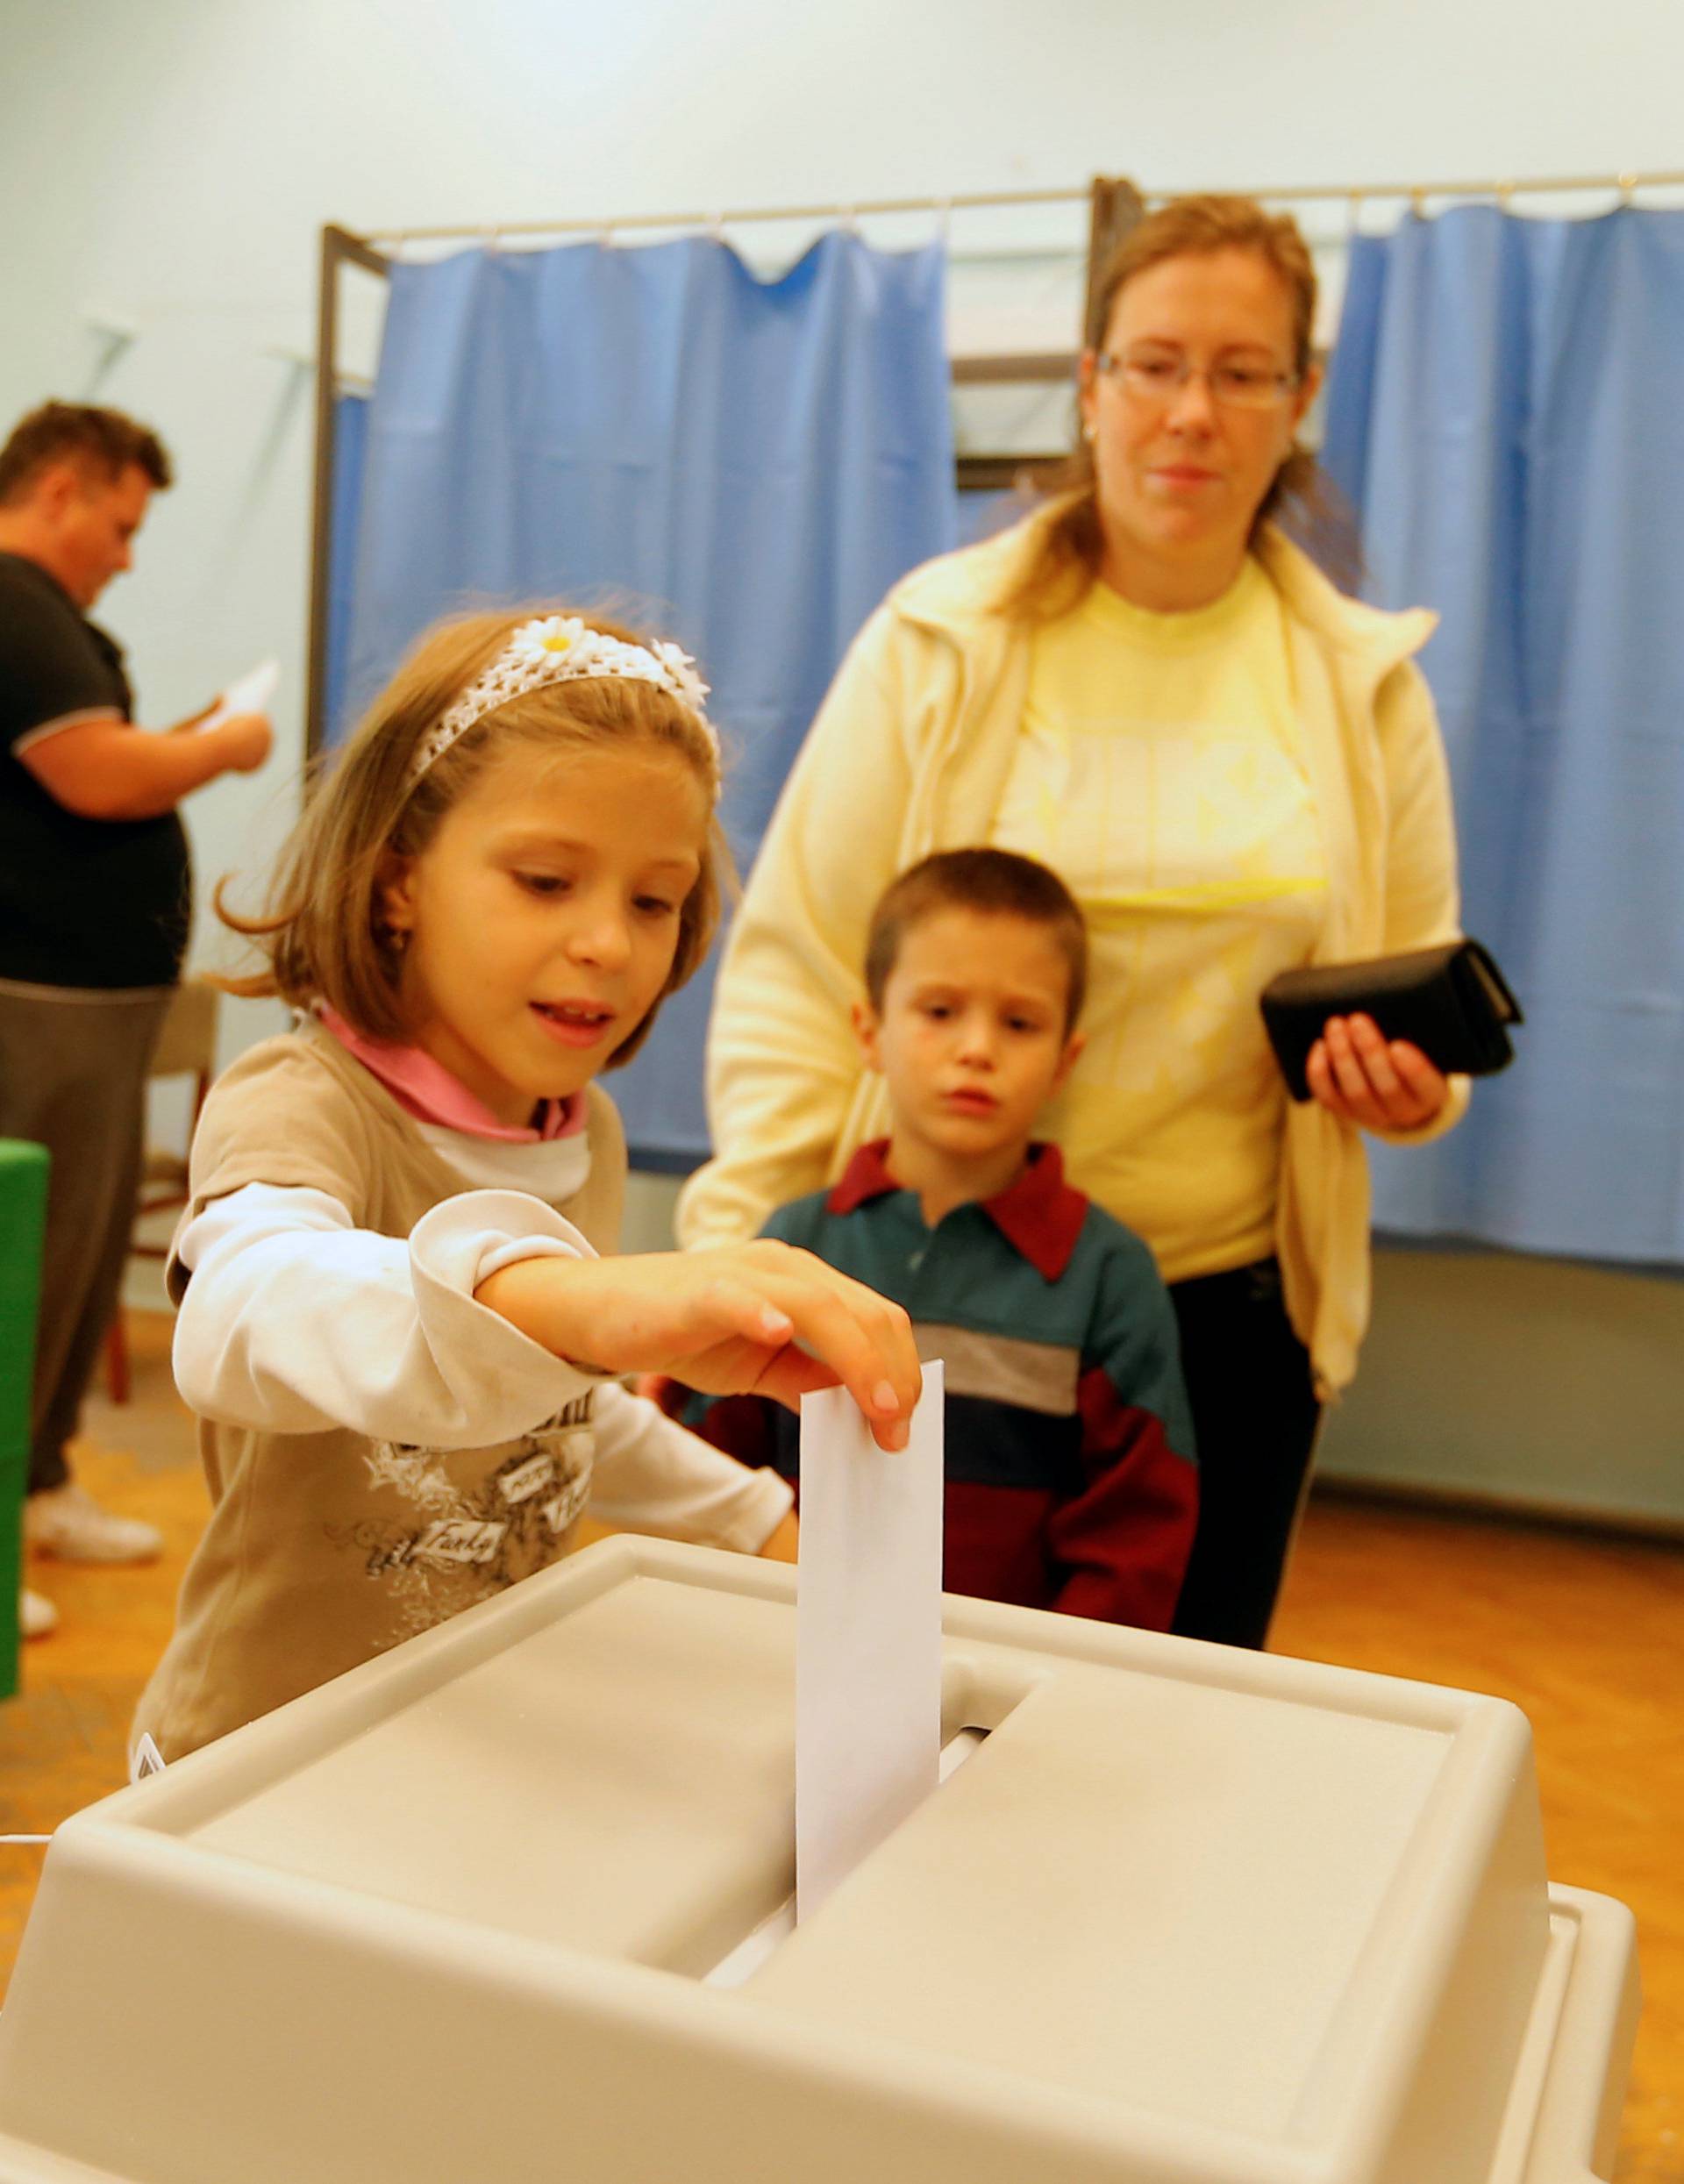 Hungarians vote in a referendum on the European Union's migrant quotas in village of Roszke